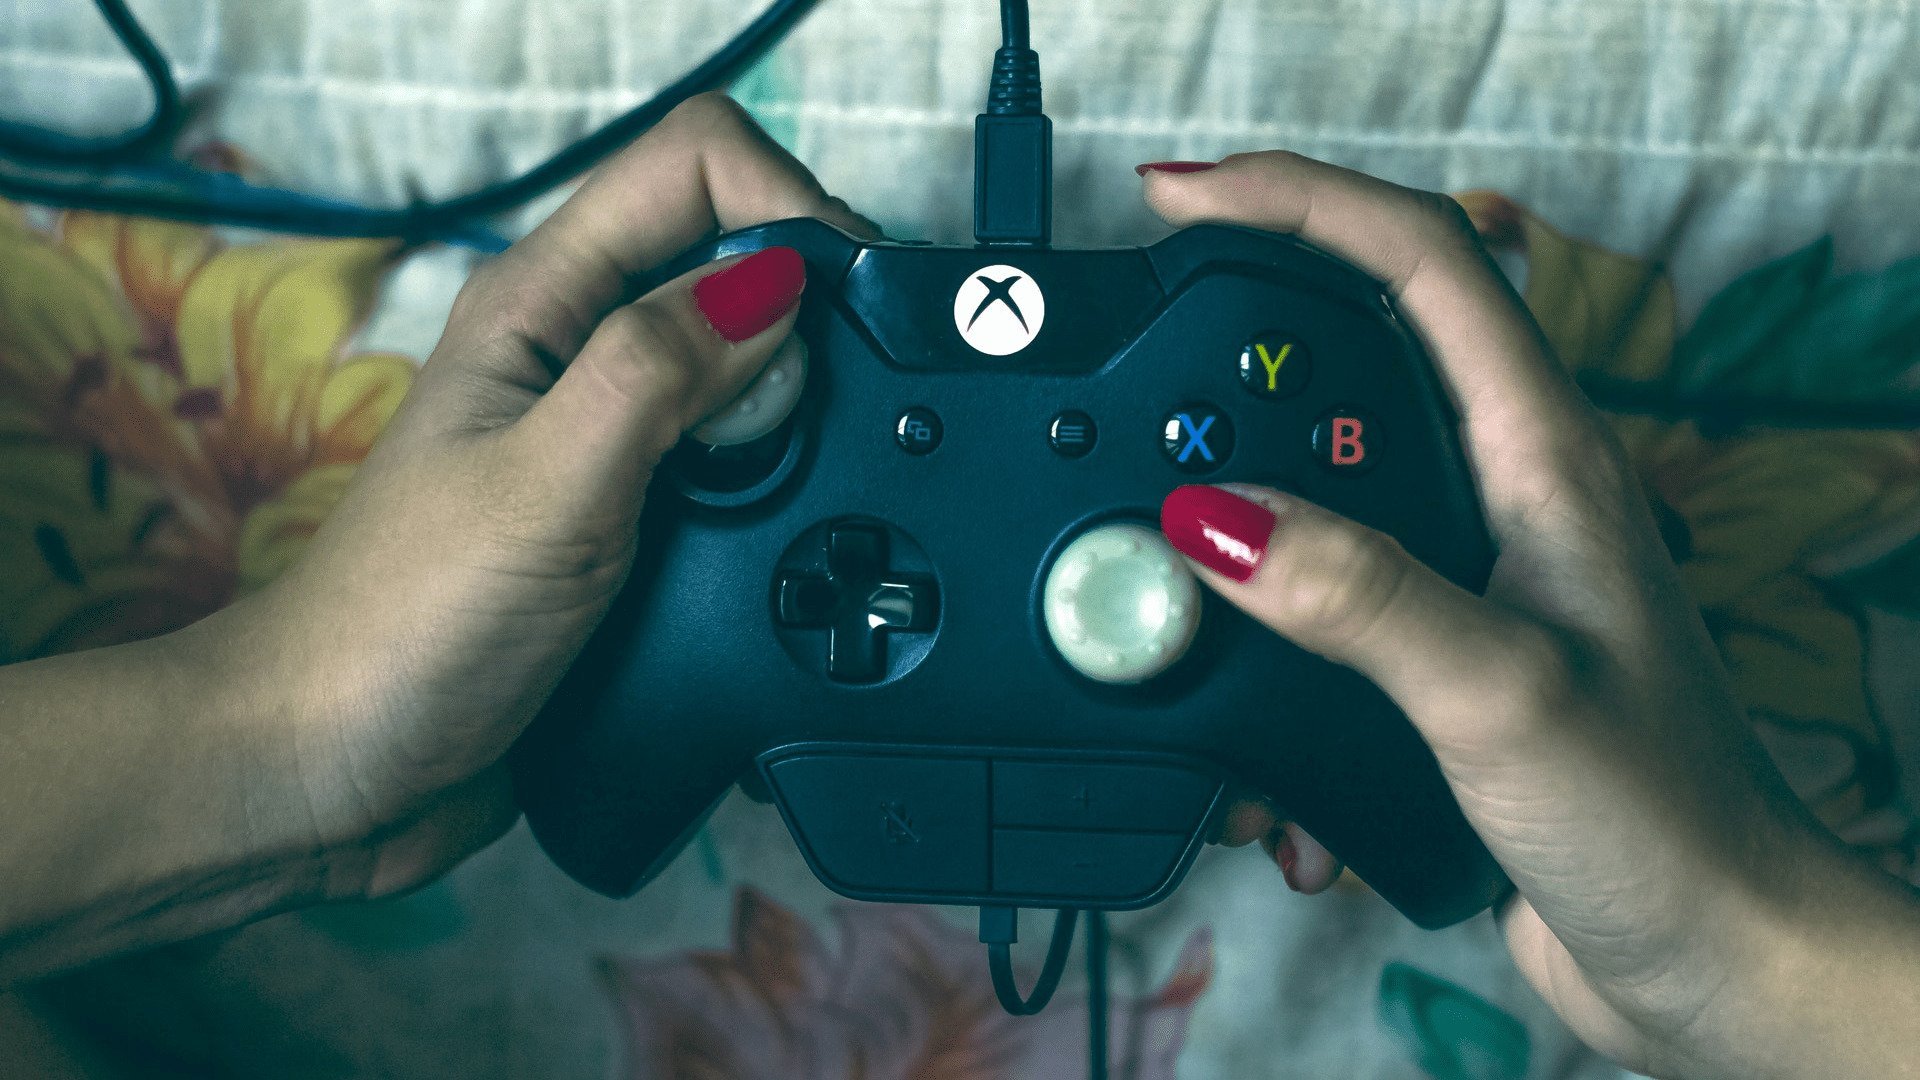 Person Holding Microsoft Xbox One Controller / Photo by Bruno Henrique from Pexels